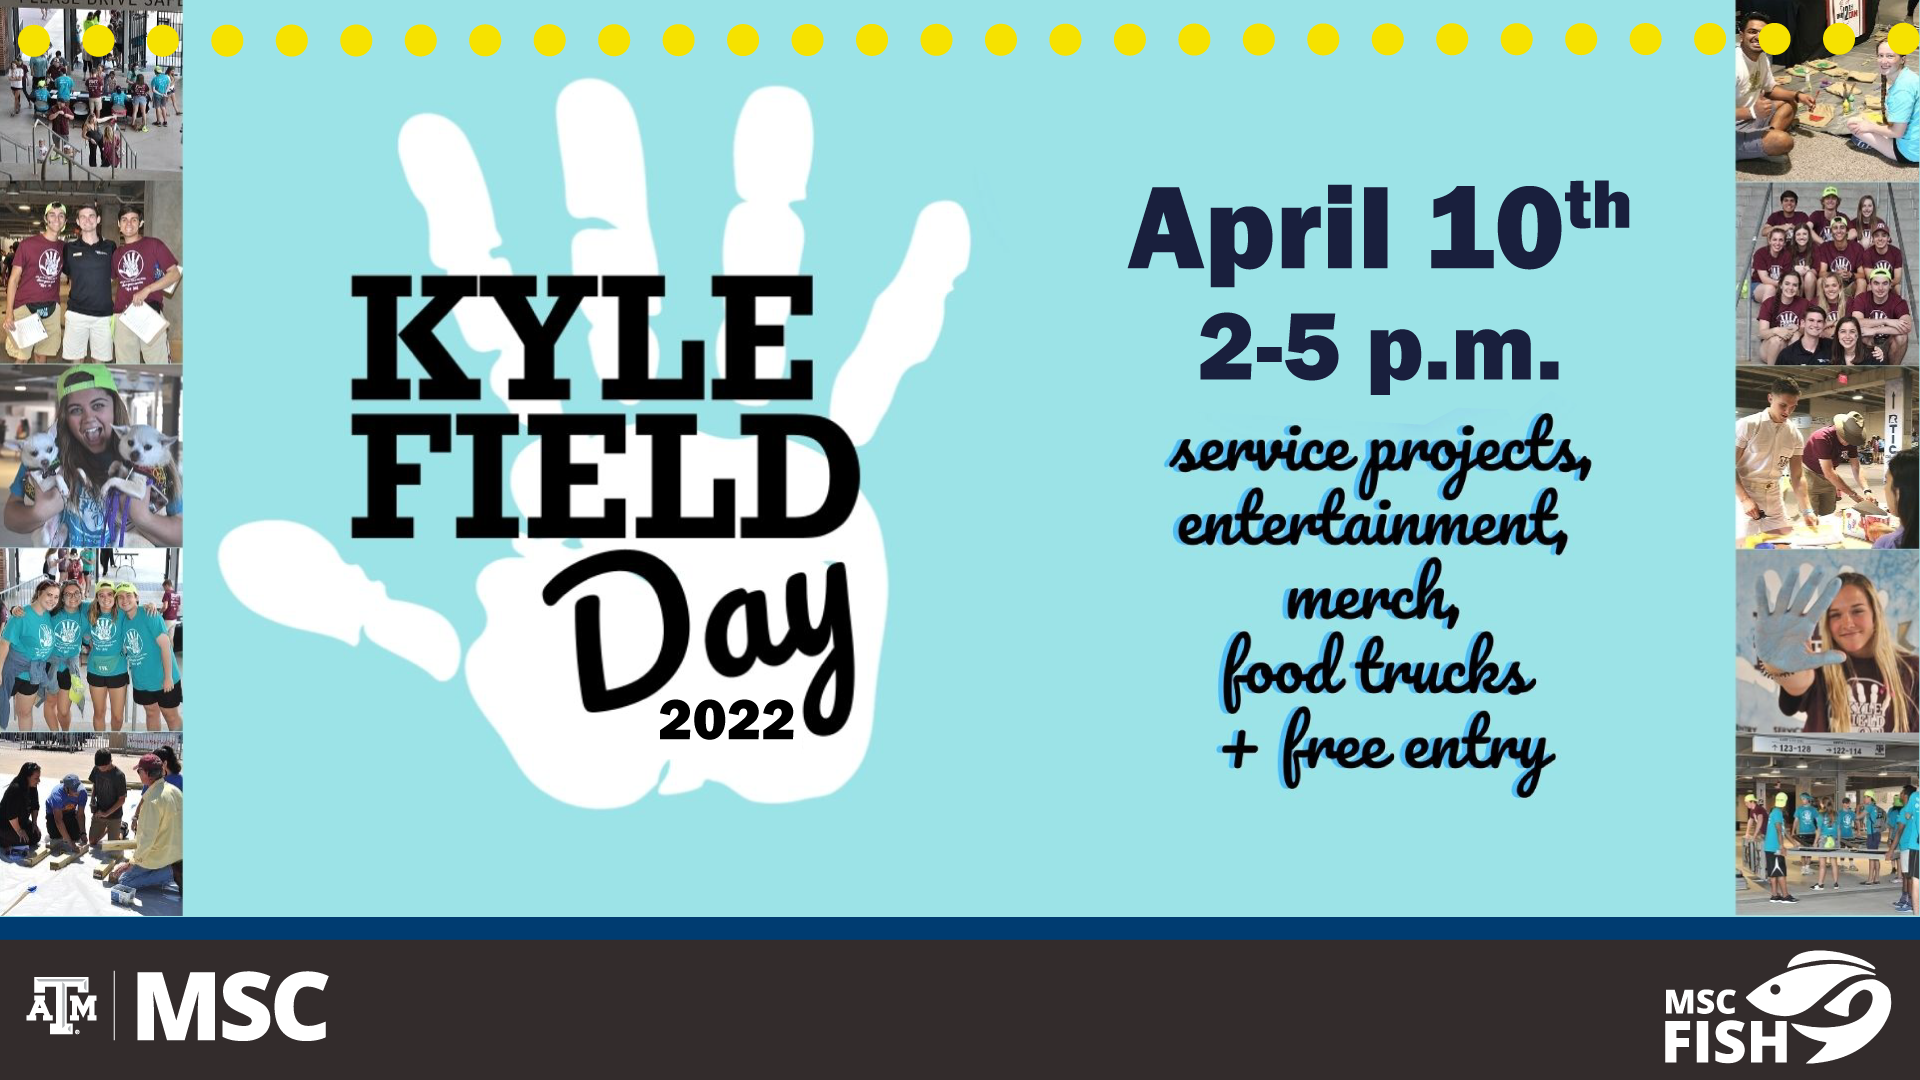 MSC FISH presents Kyle Field Day 20212 April 10 from 2 to 5 p.m., service projects, entertainment, merch, food trucks, and free entry.